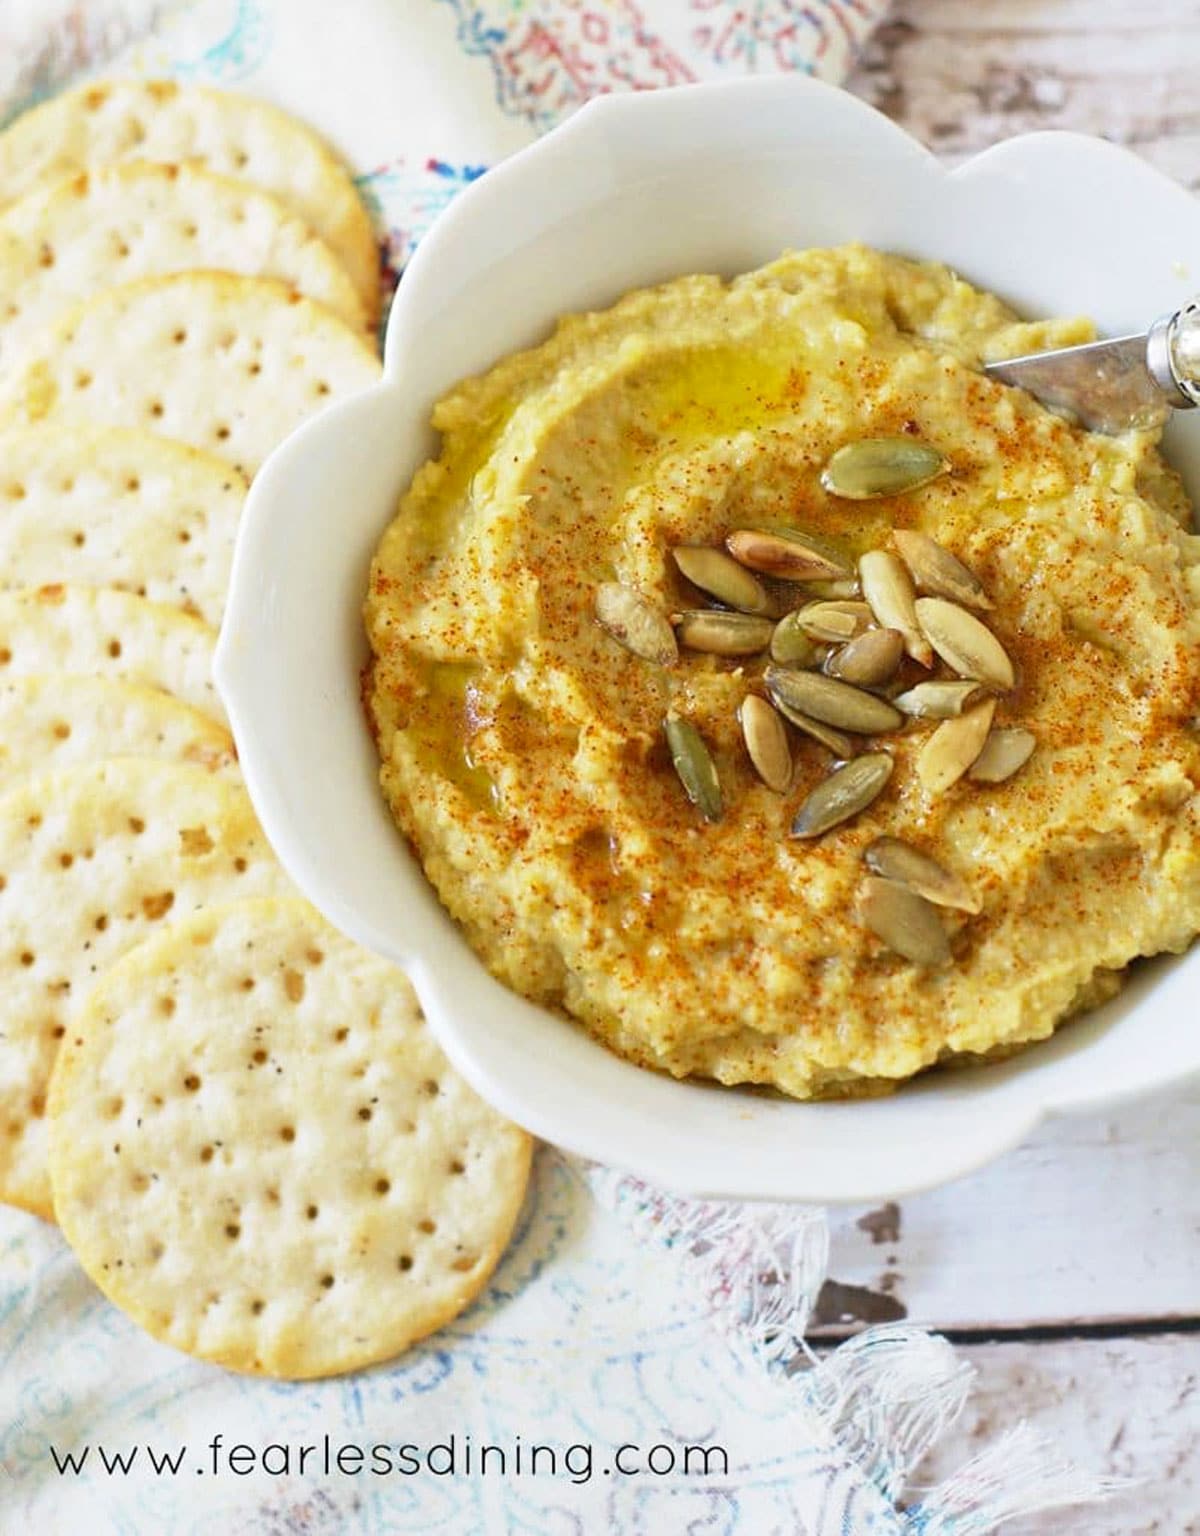 another shot of the bowl of hatch chili hummus next to crackers